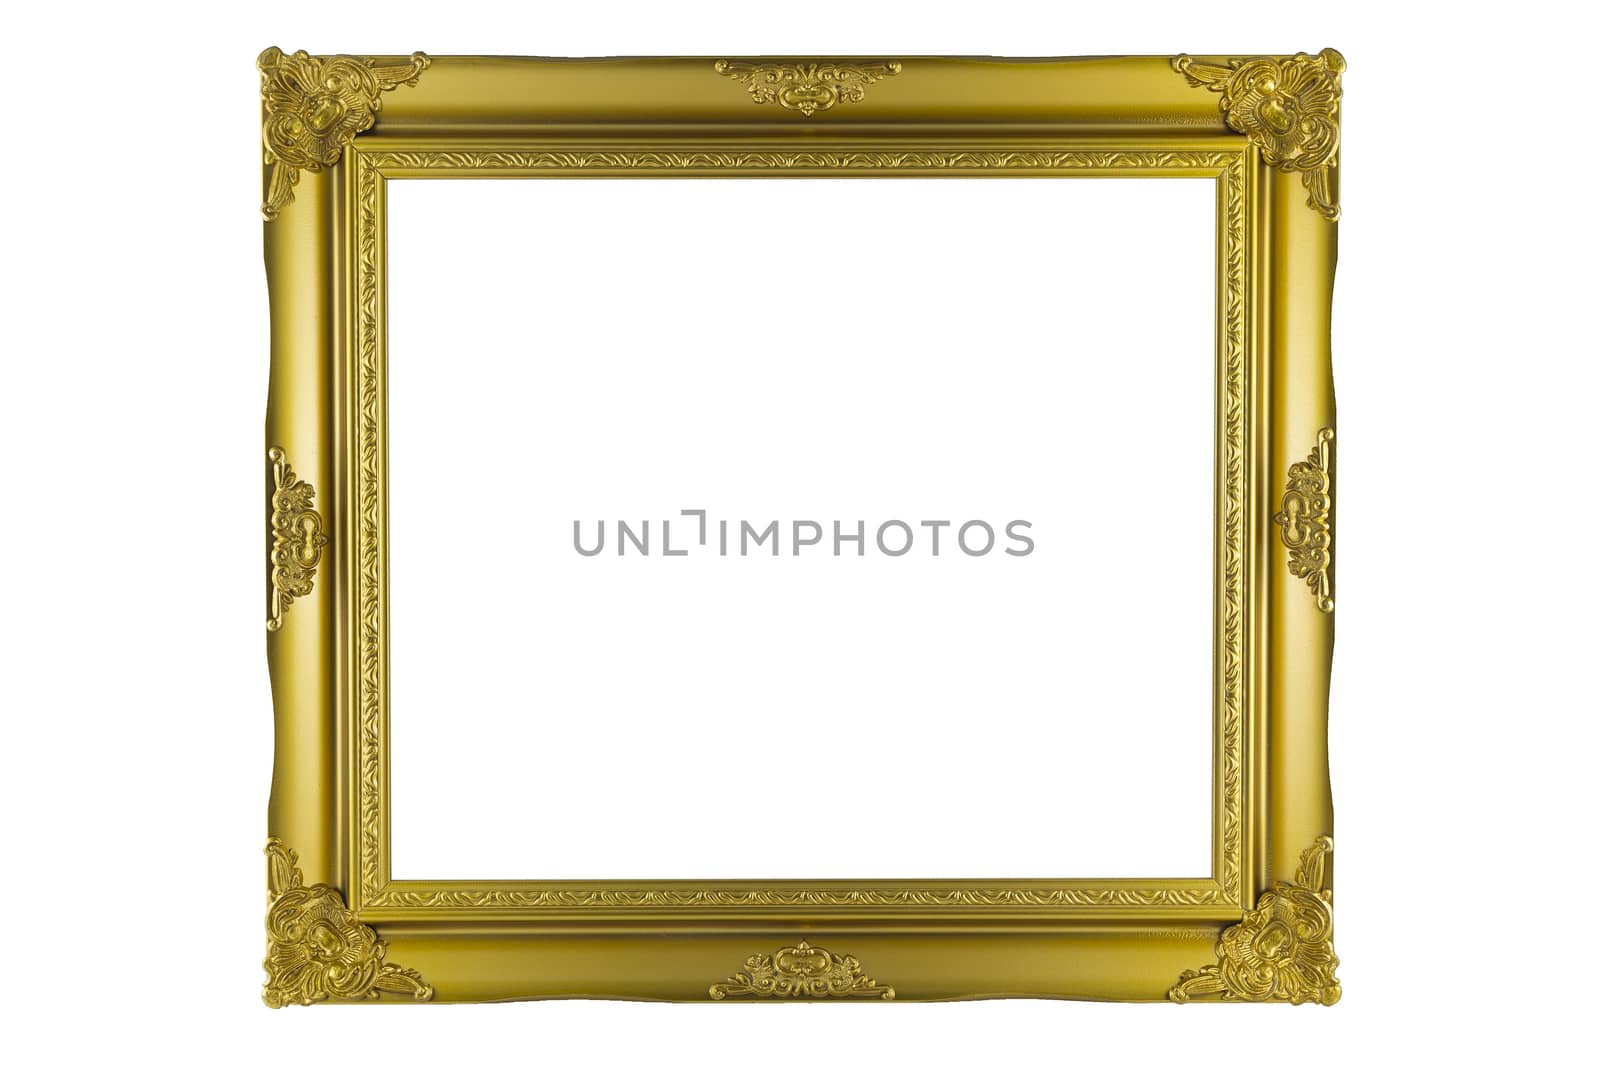 Bronze and Gold Frame vintage isolated on white background. by jayzynism